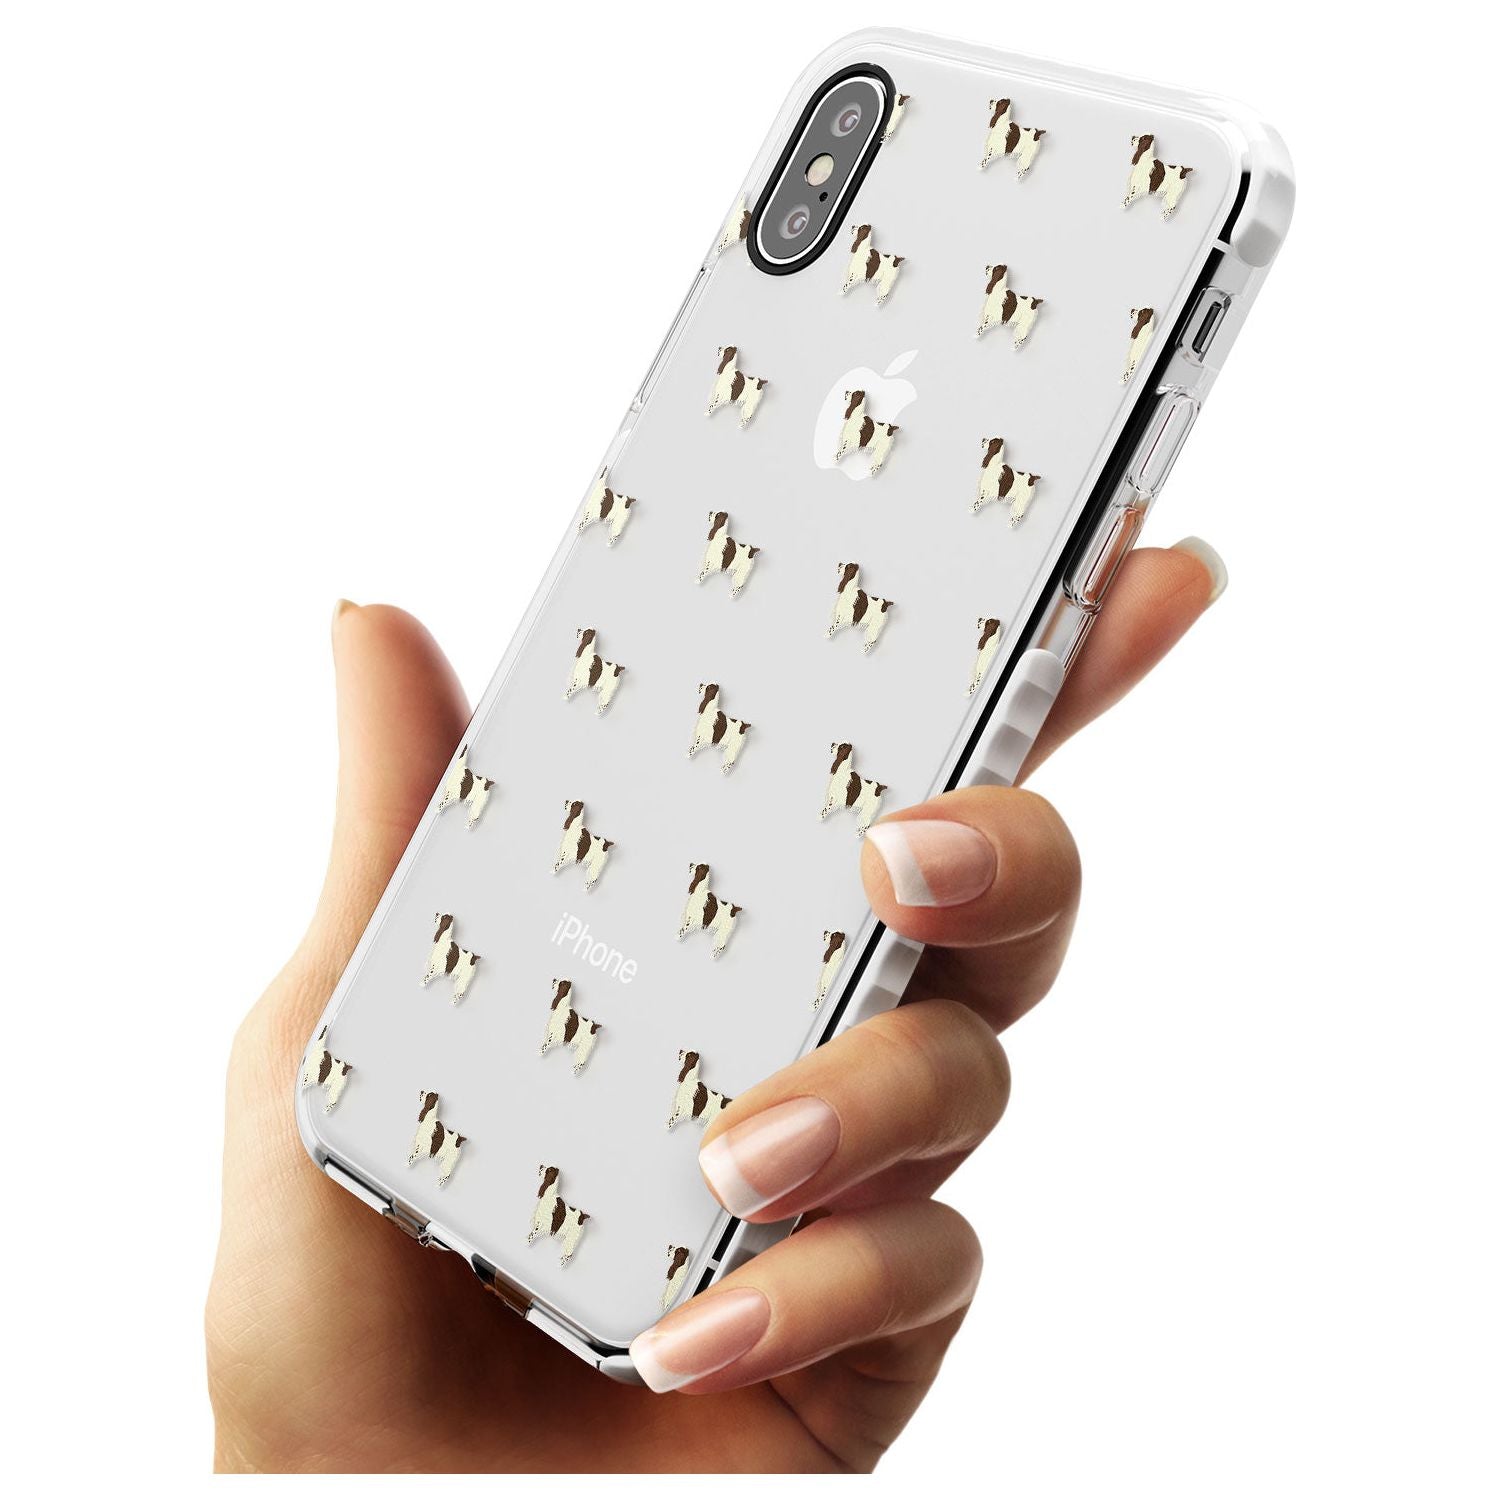 English Springer Spaniel Dog Pattern Clear Impact Phone Case for iPhone X XS Max XR